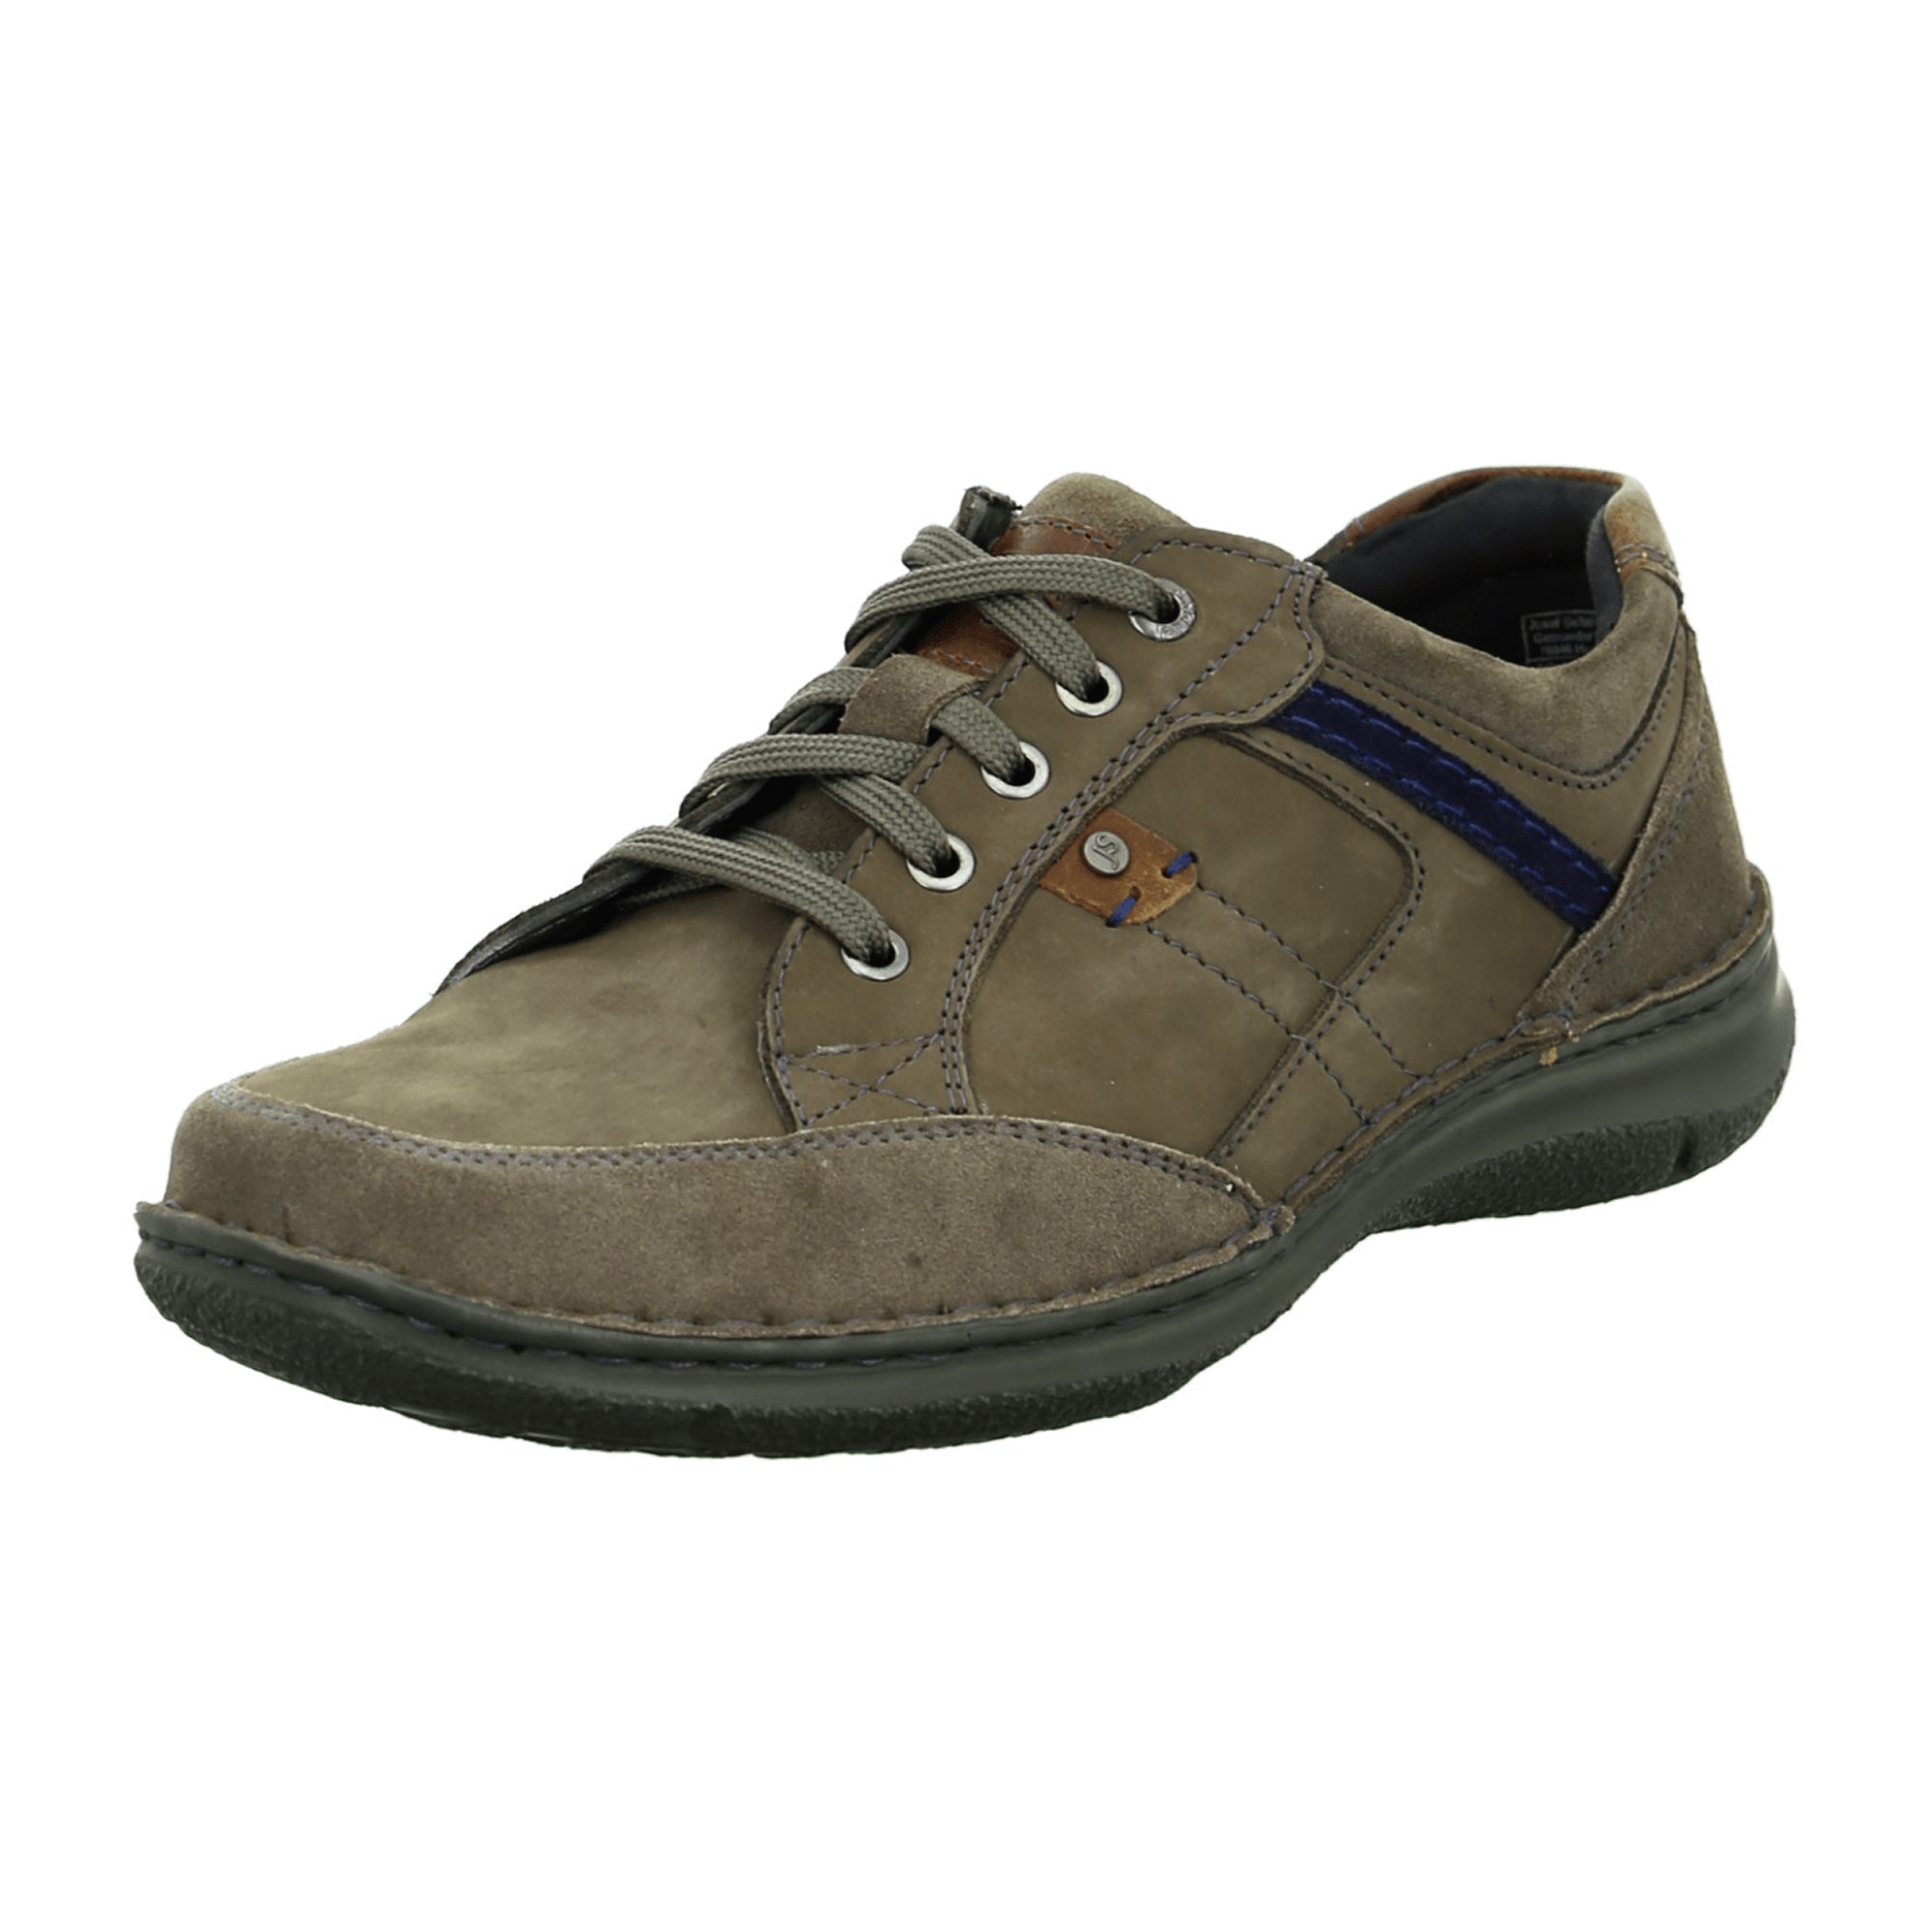 Josef Seibel Comfortable Men's Lace-up Shoes in Grey